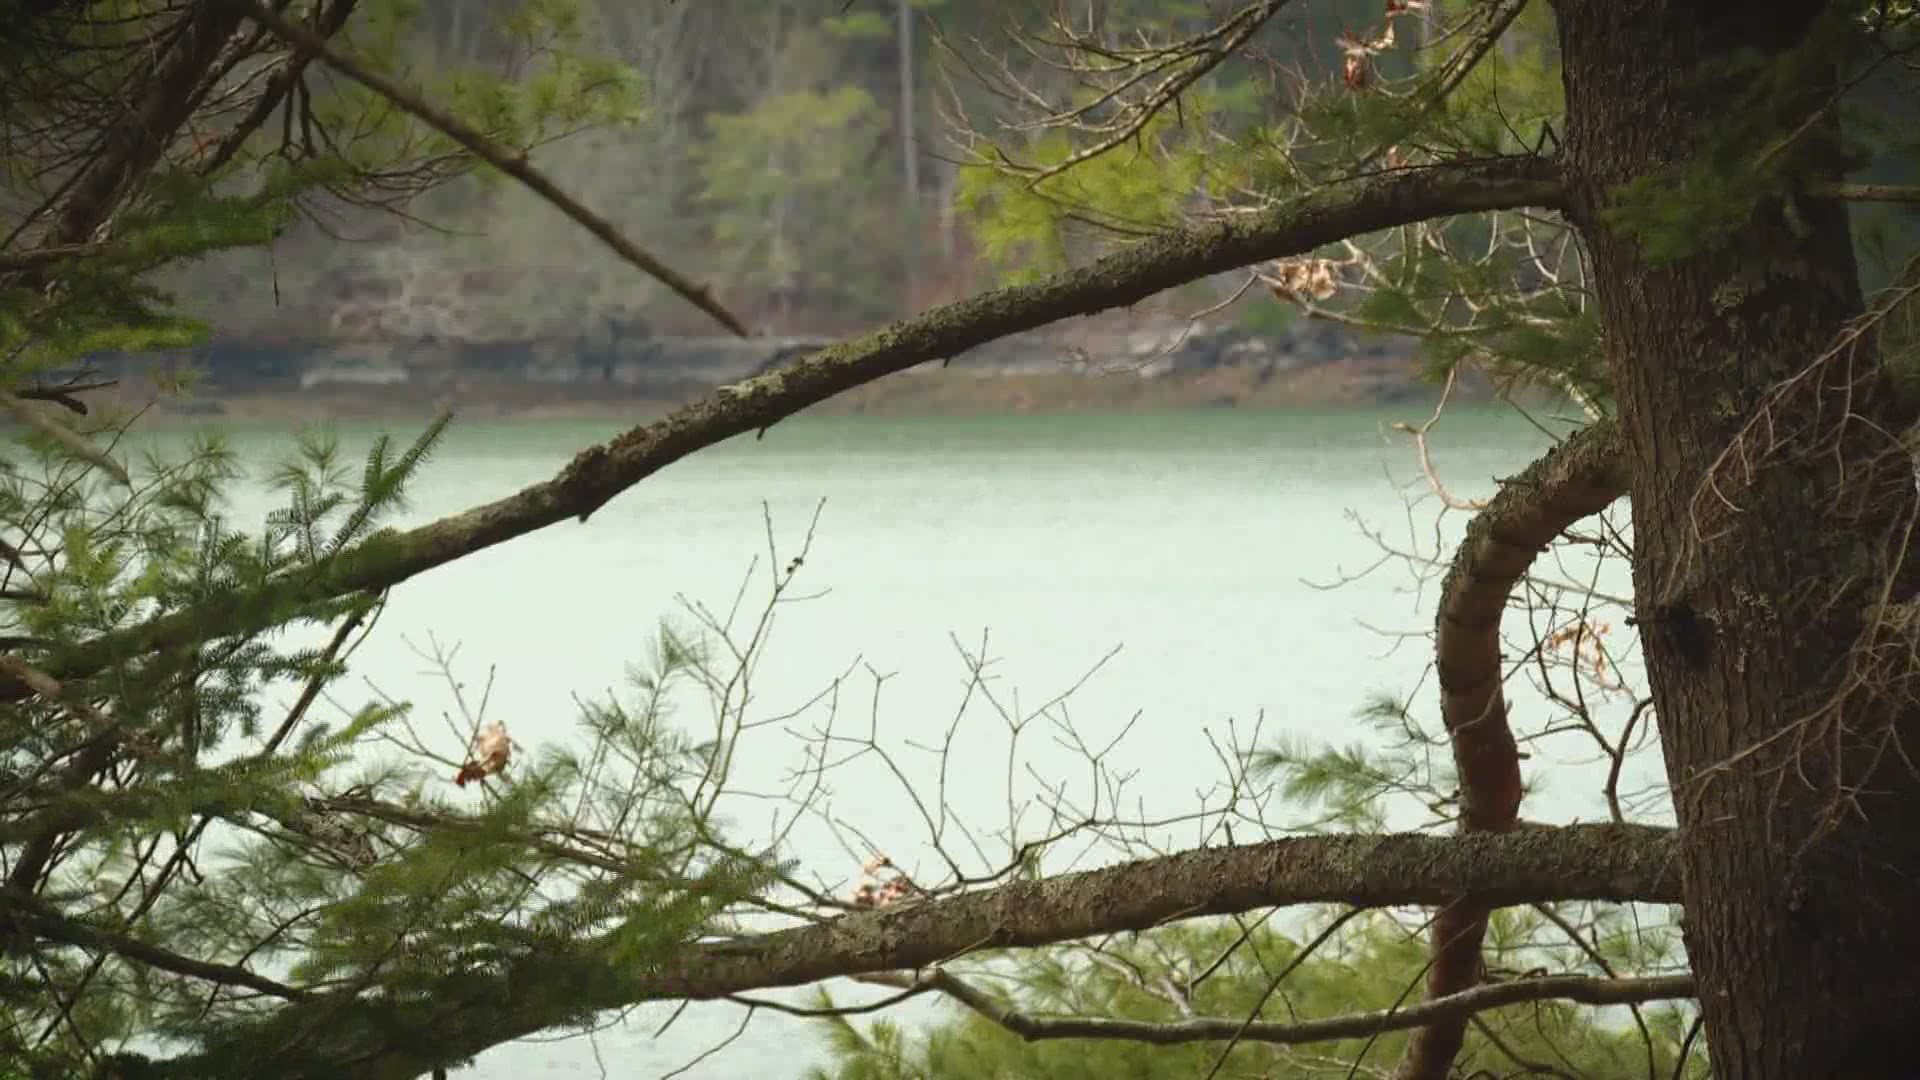 Photojournalist Kirk Cratty takes us to Cross River Preserve in Boothbay.